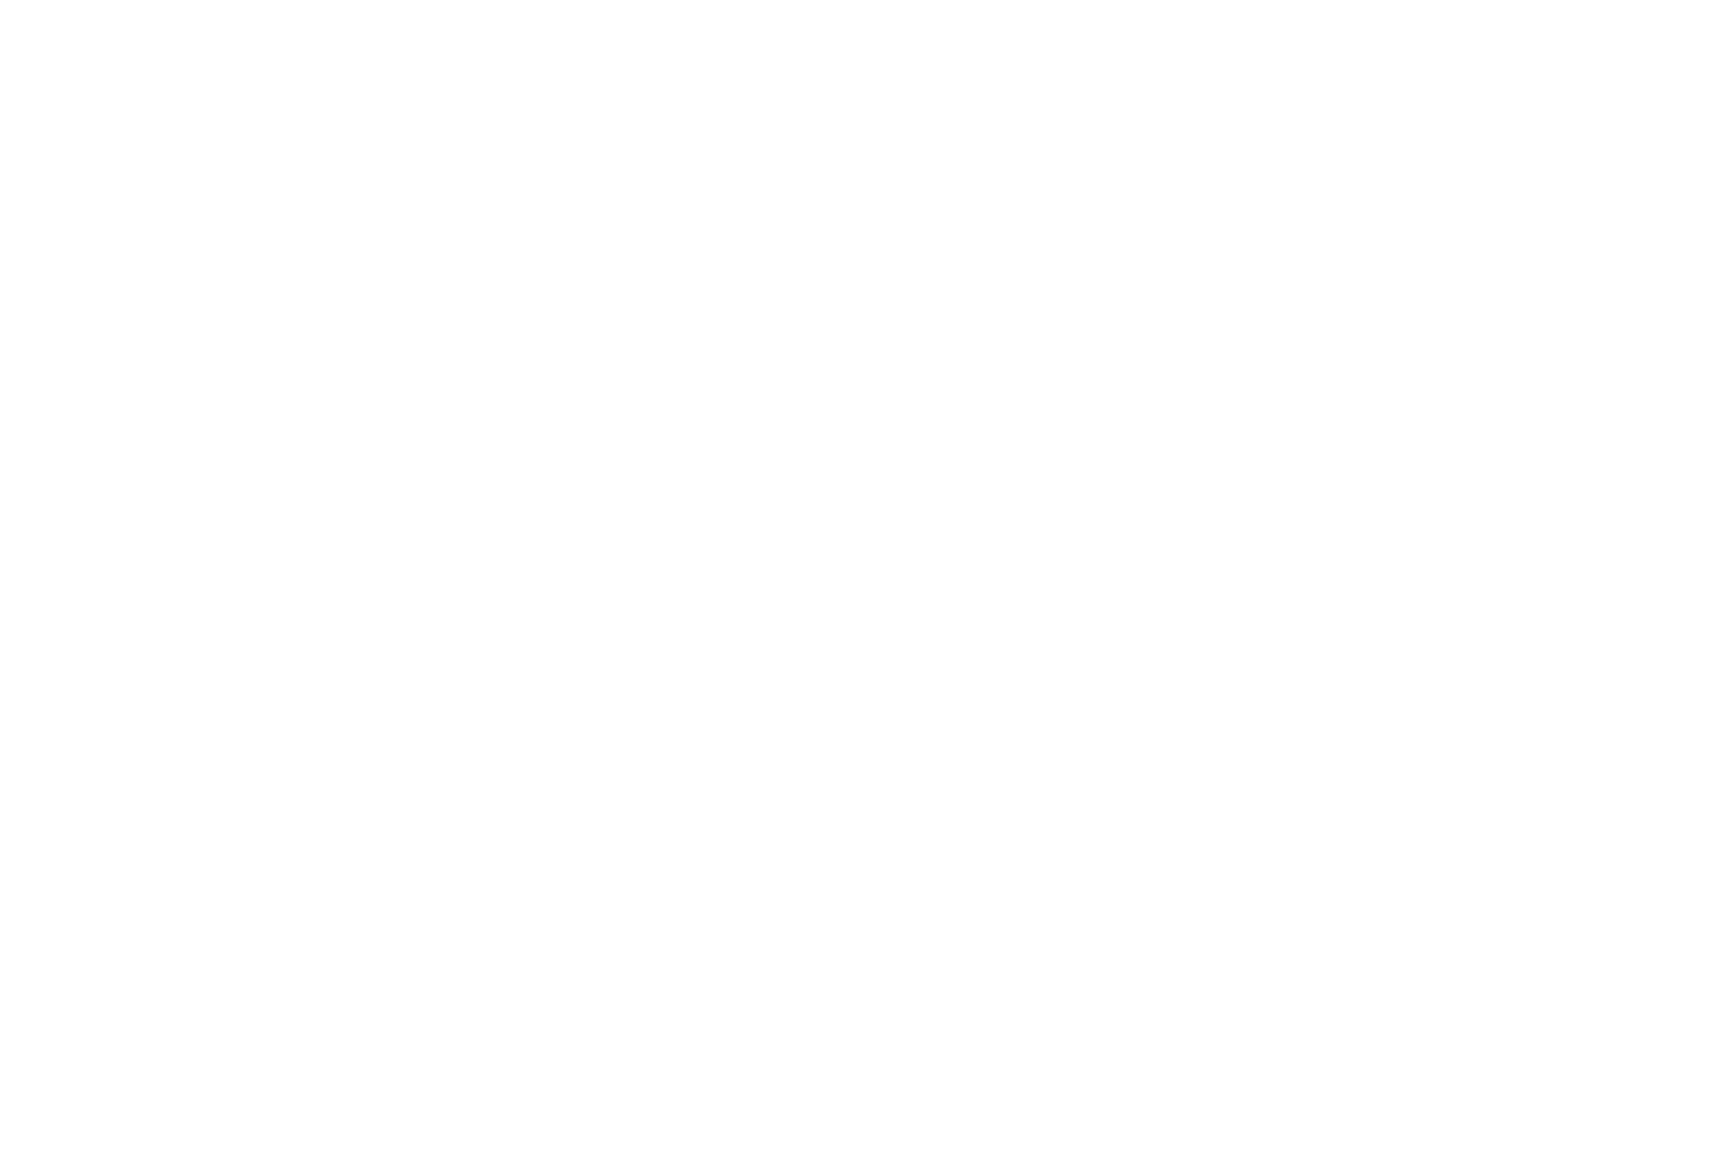 OFFICIAL SELECTION - Tryon International Film Festival - TRYON19 - 2019.png